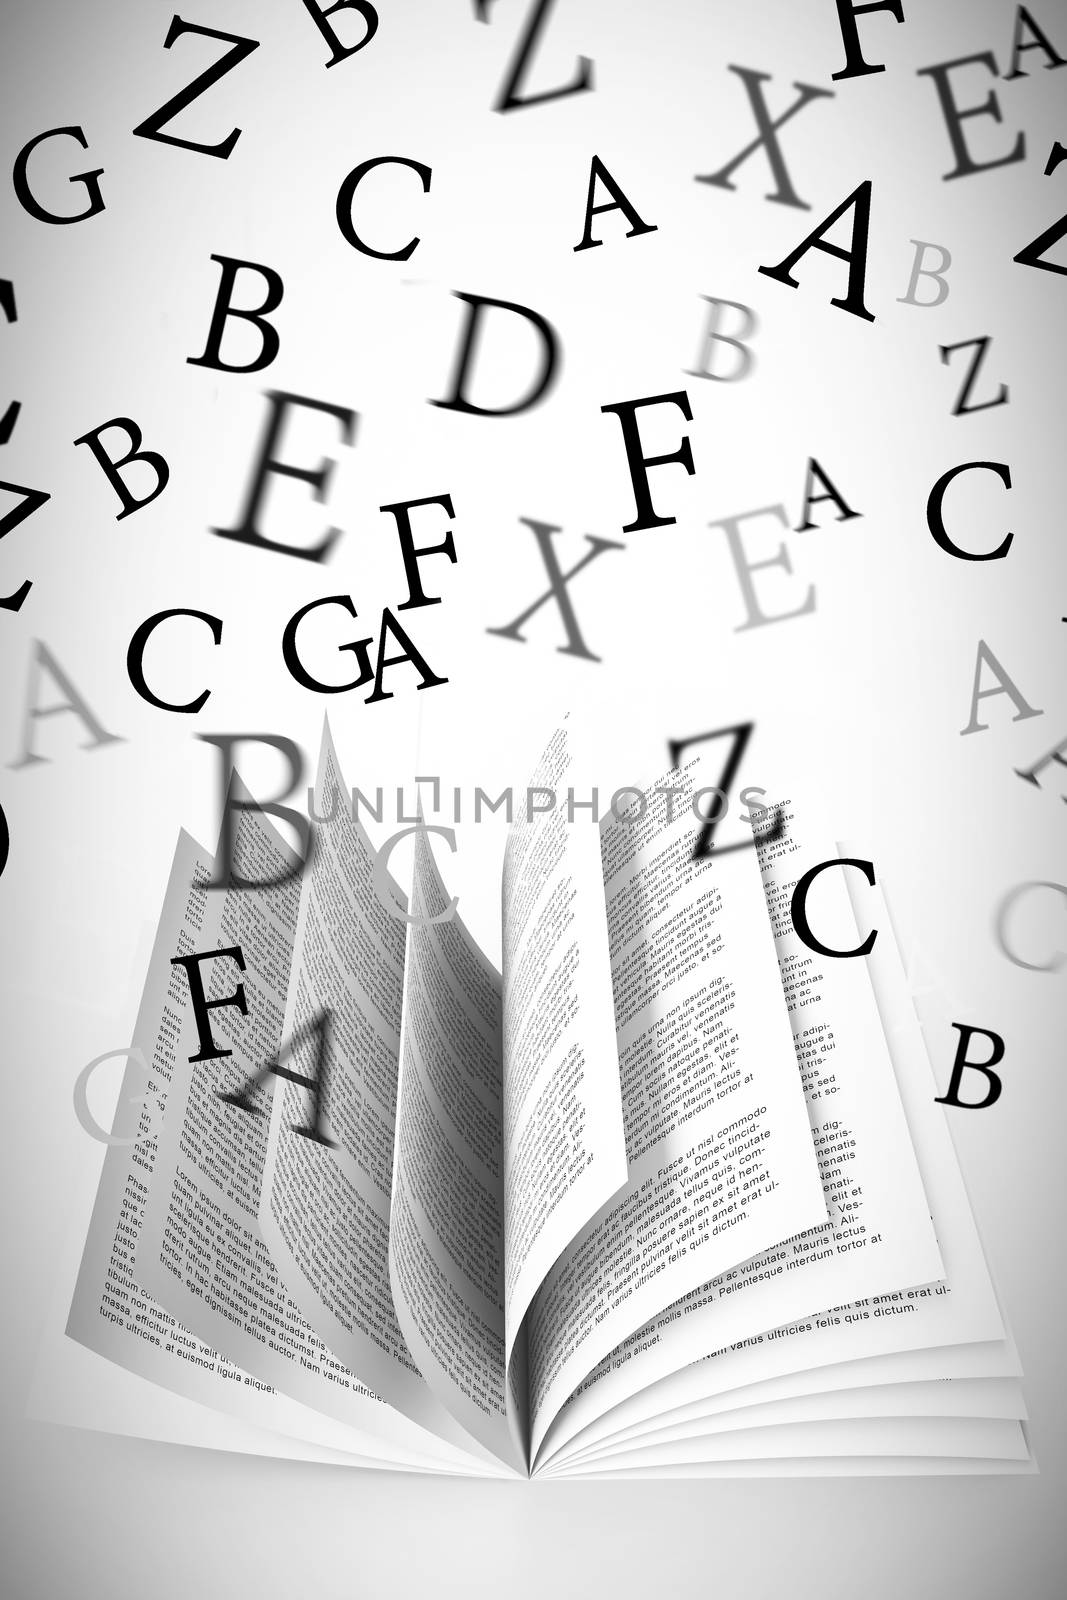 letters against white background with vignette